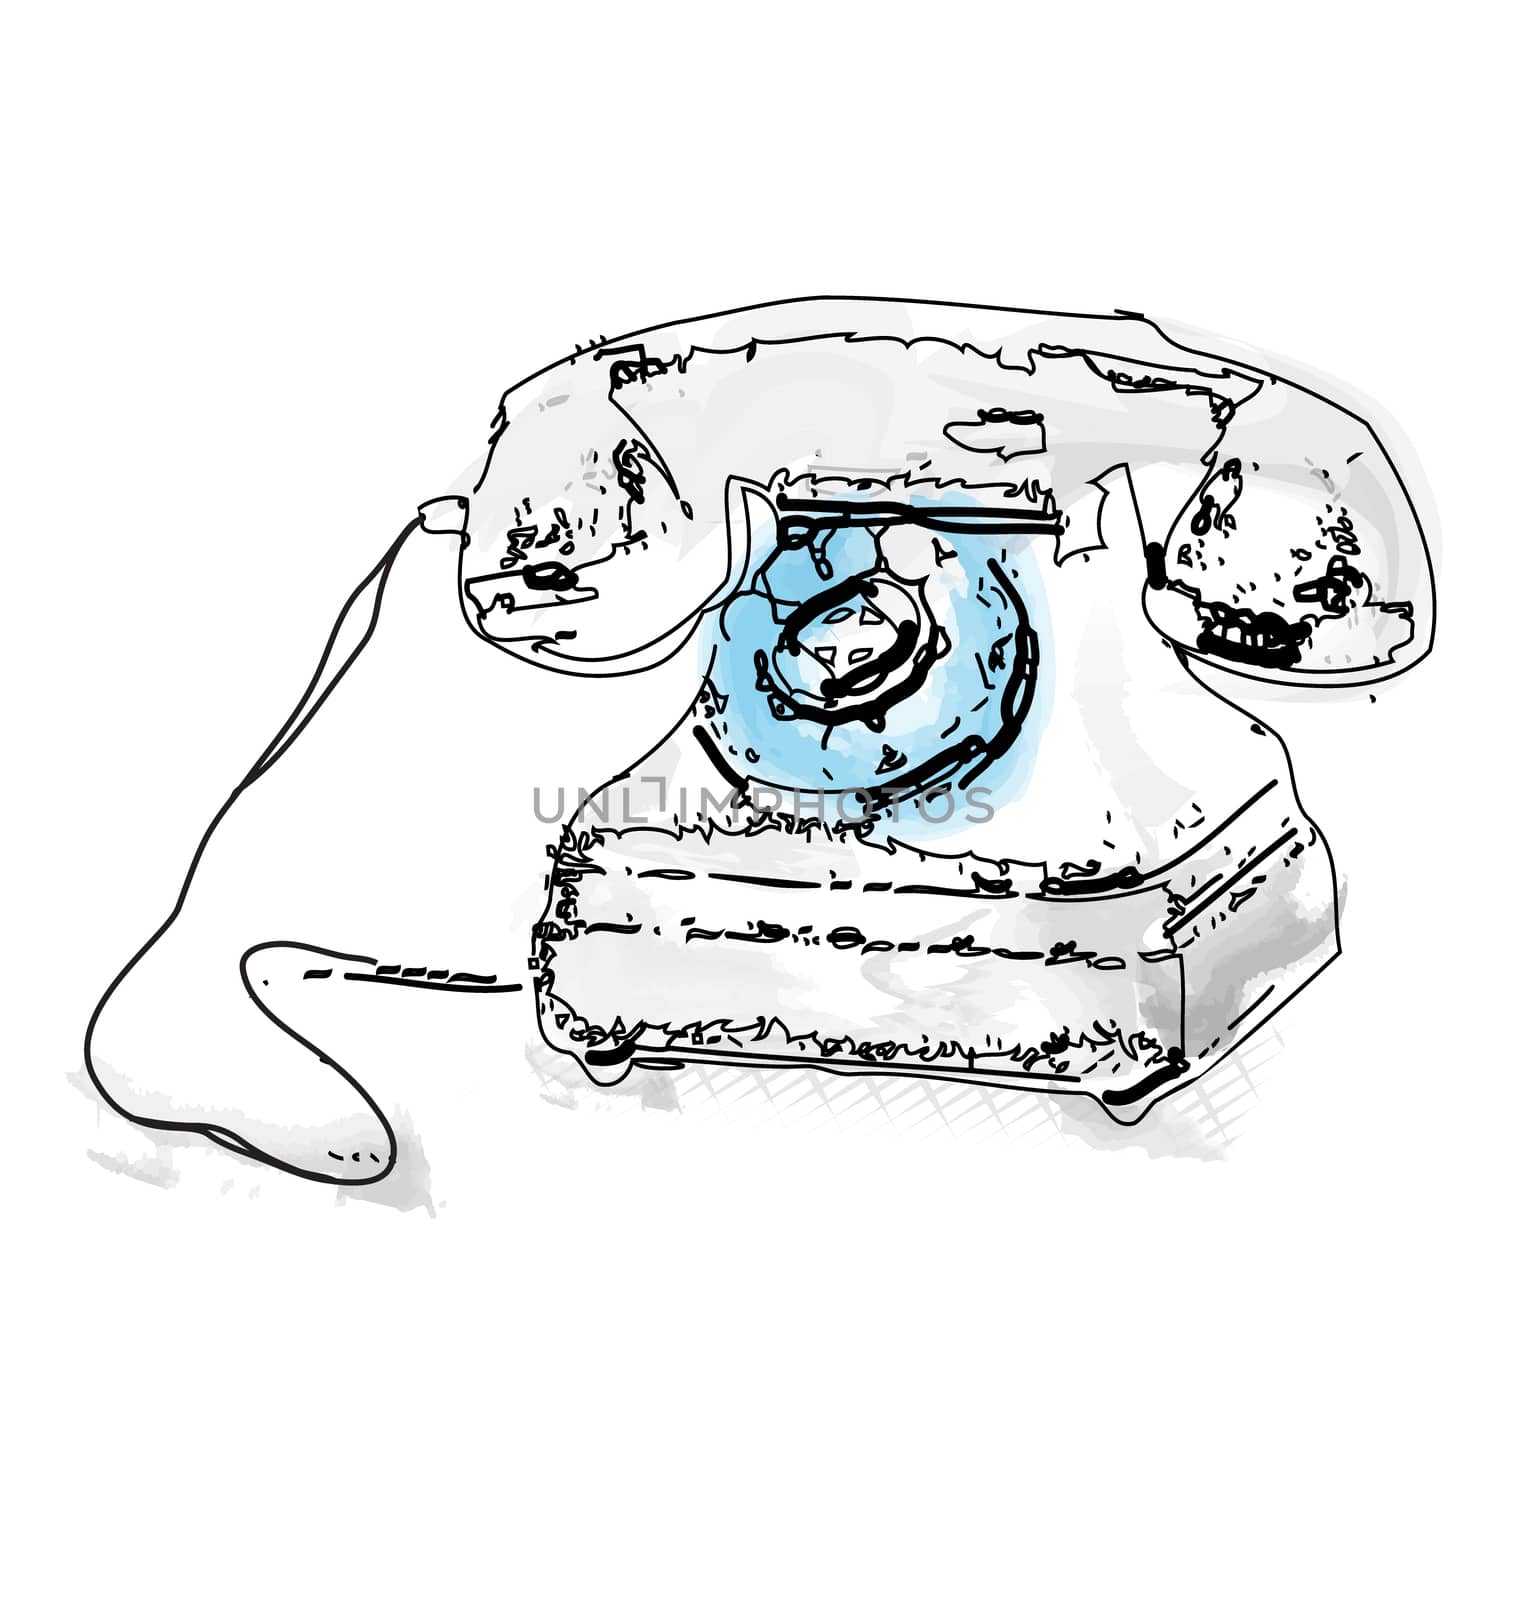 Retro telephone illustration in watercolor style by stocklady